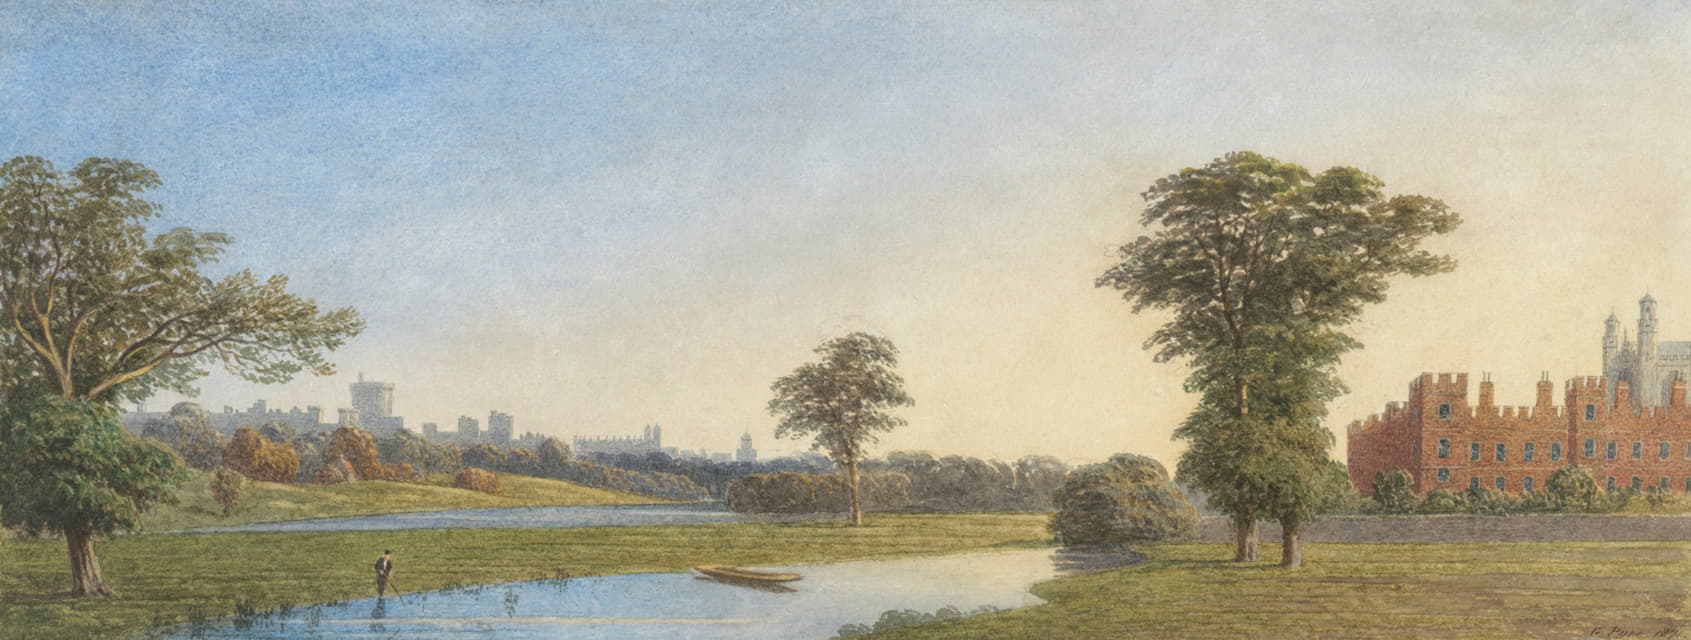 George Pyne - Windsor Castle and Eton College from Fellows’ Eyot, River Thames